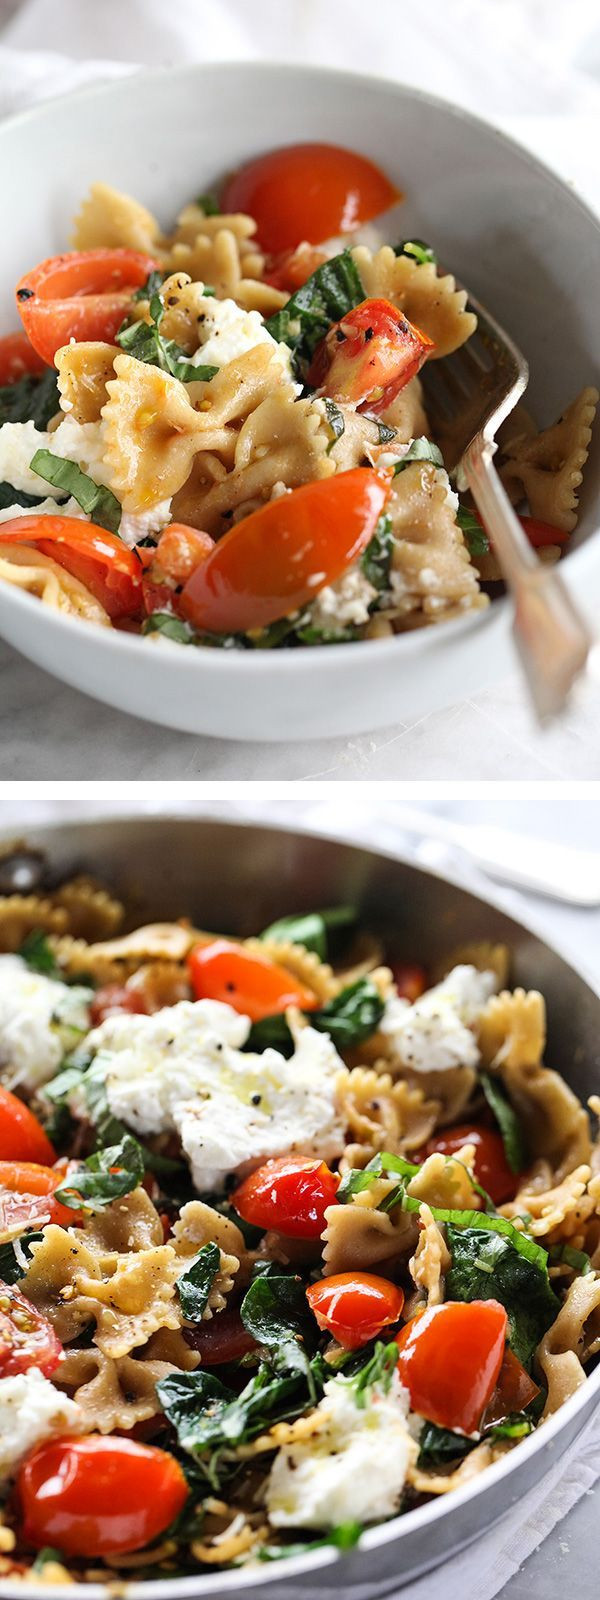 Clean Eating Pasta Recipes
 Best Clean Eating Blogs Pinned Over 50 000 Times